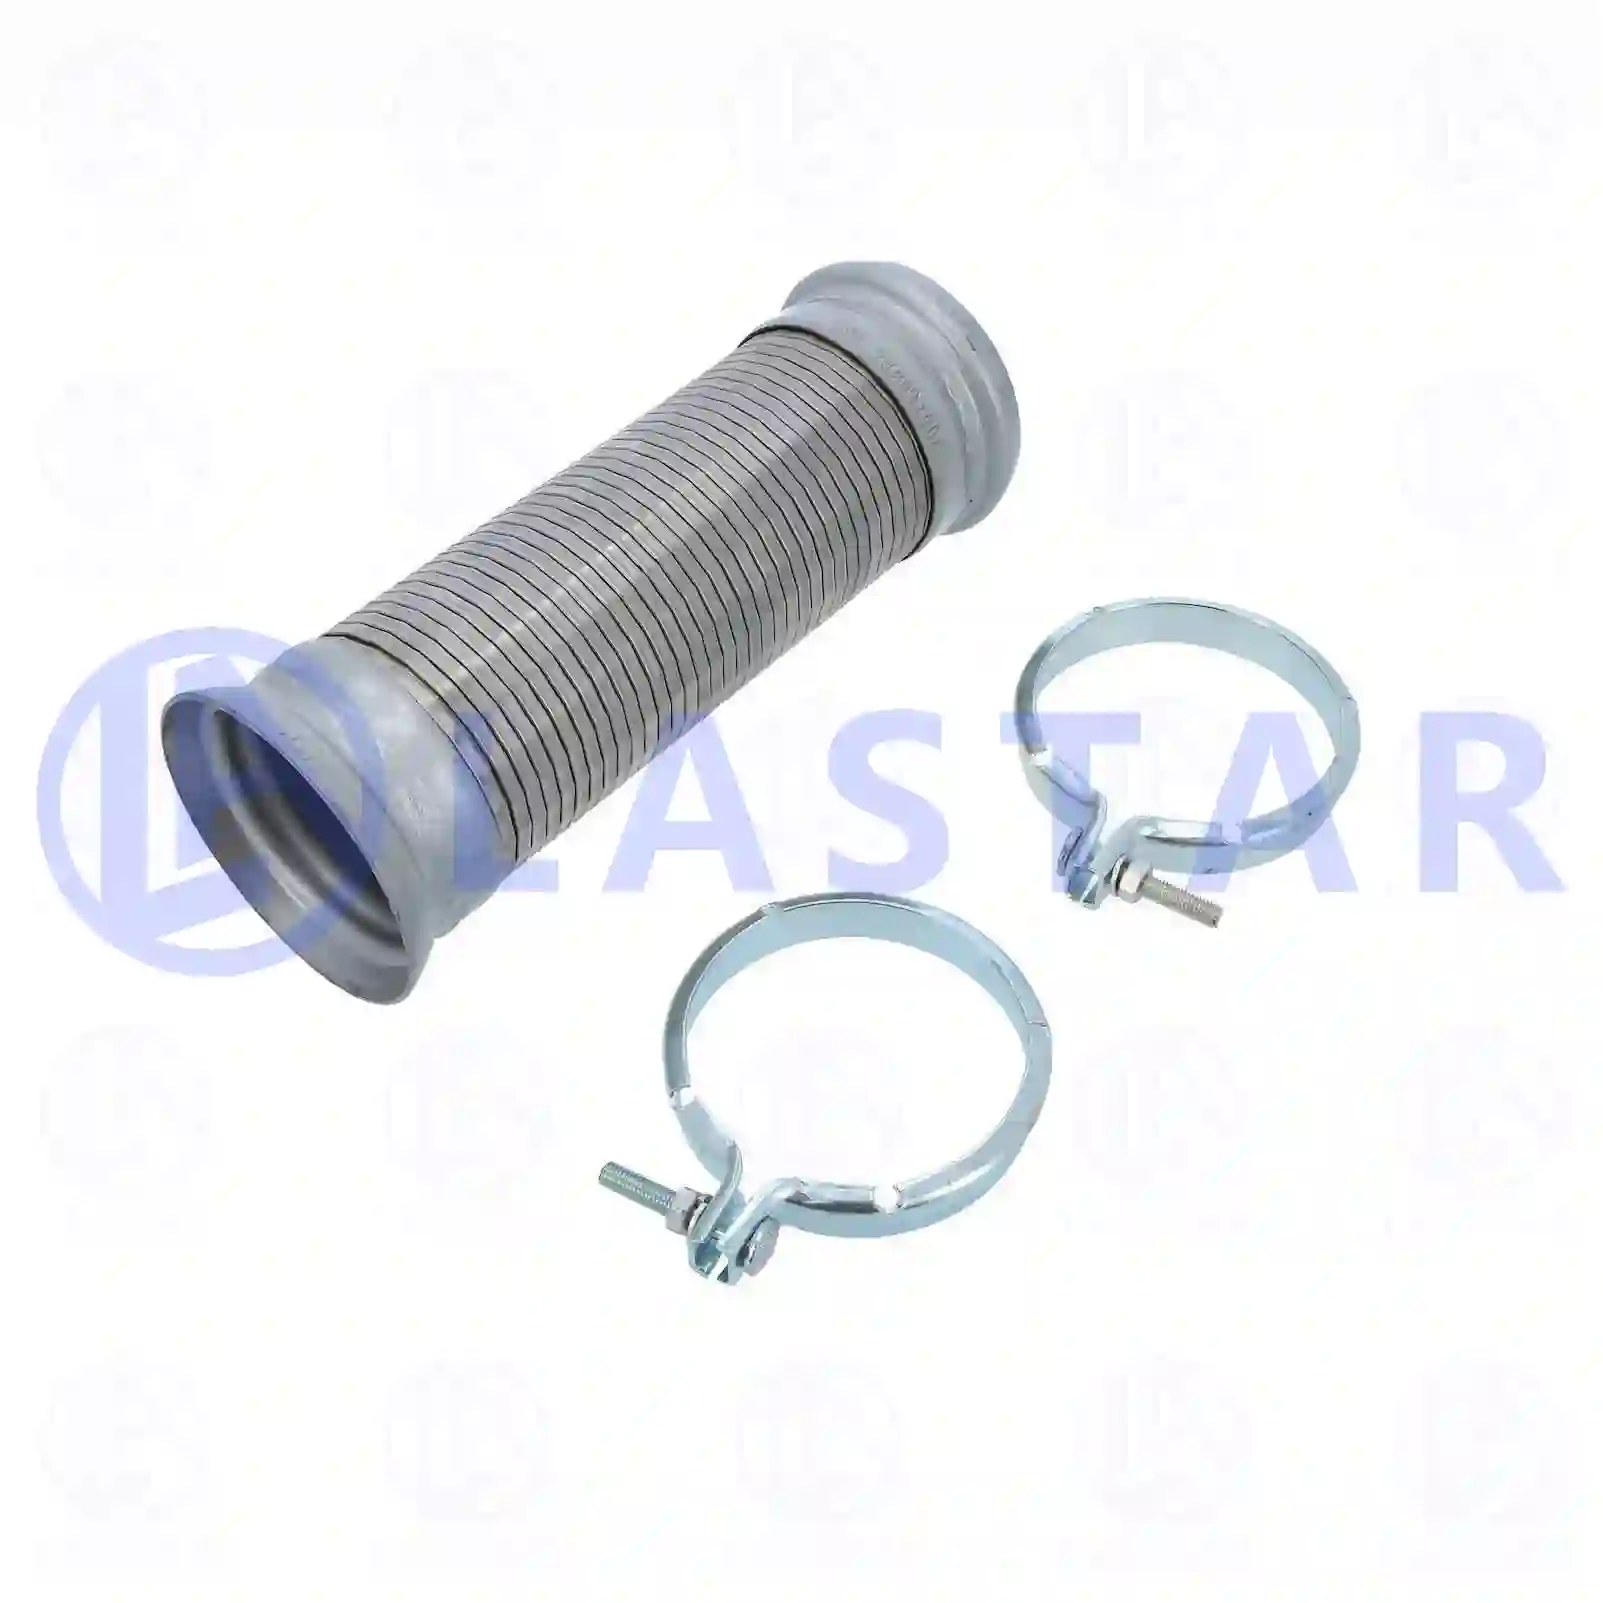 Flexible pipe, with clamps, 77706413, 6204900465S1 ||  77706413 Lastar Spare Part | Truck Spare Parts, Auotomotive Spare Parts Flexible pipe, with clamps, 77706413, 6204900465S1 ||  77706413 Lastar Spare Part | Truck Spare Parts, Auotomotive Spare Parts